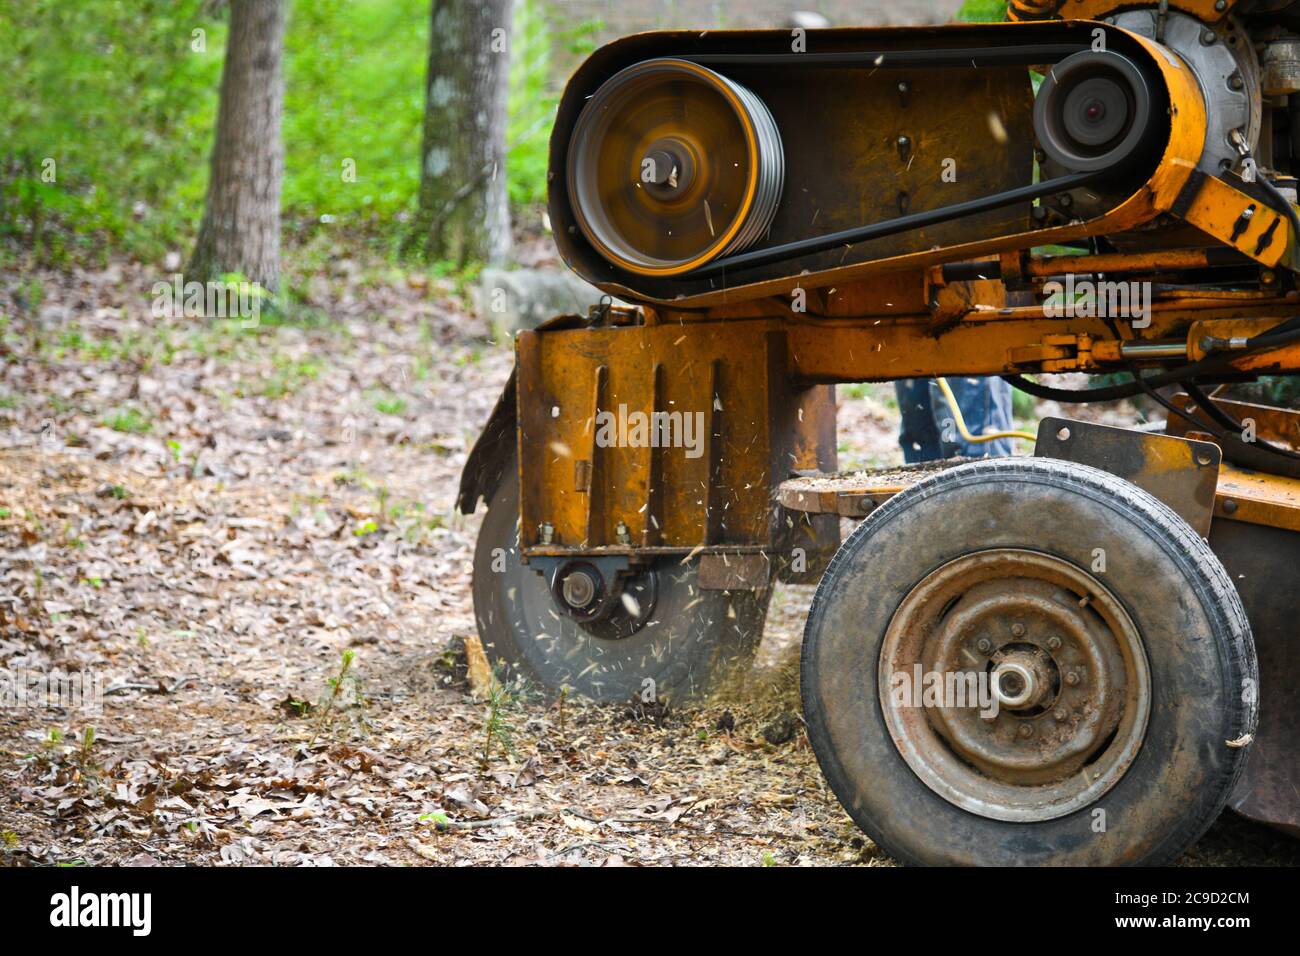 A Stump Grinding  Machine Removing a Stump from Cut Down Tree Stock Photo